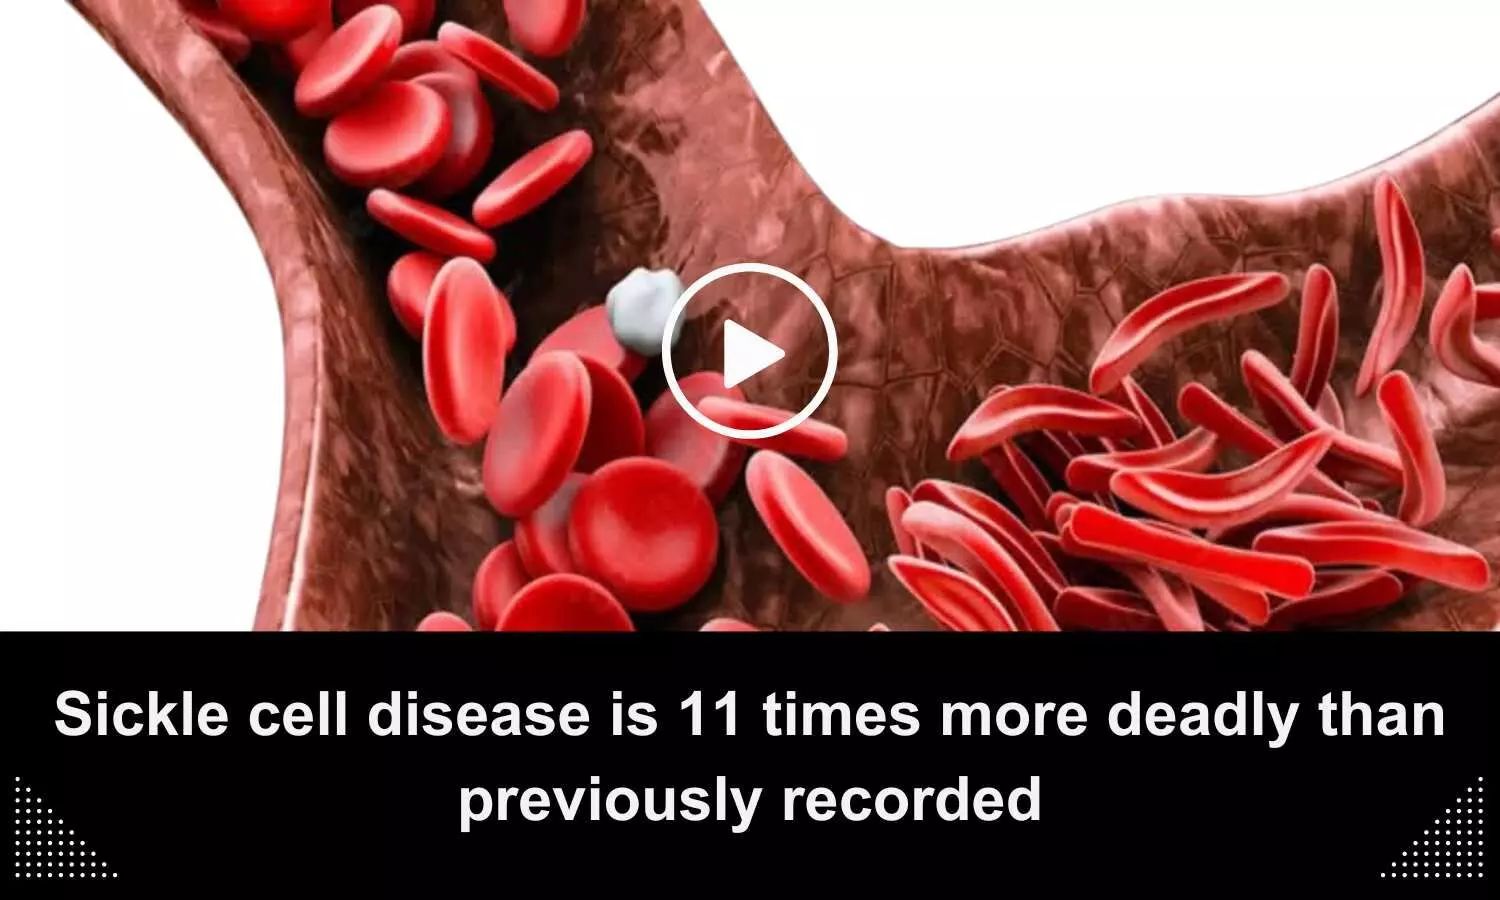 Sickle cell disease is 11 times more deadly than previously recorded